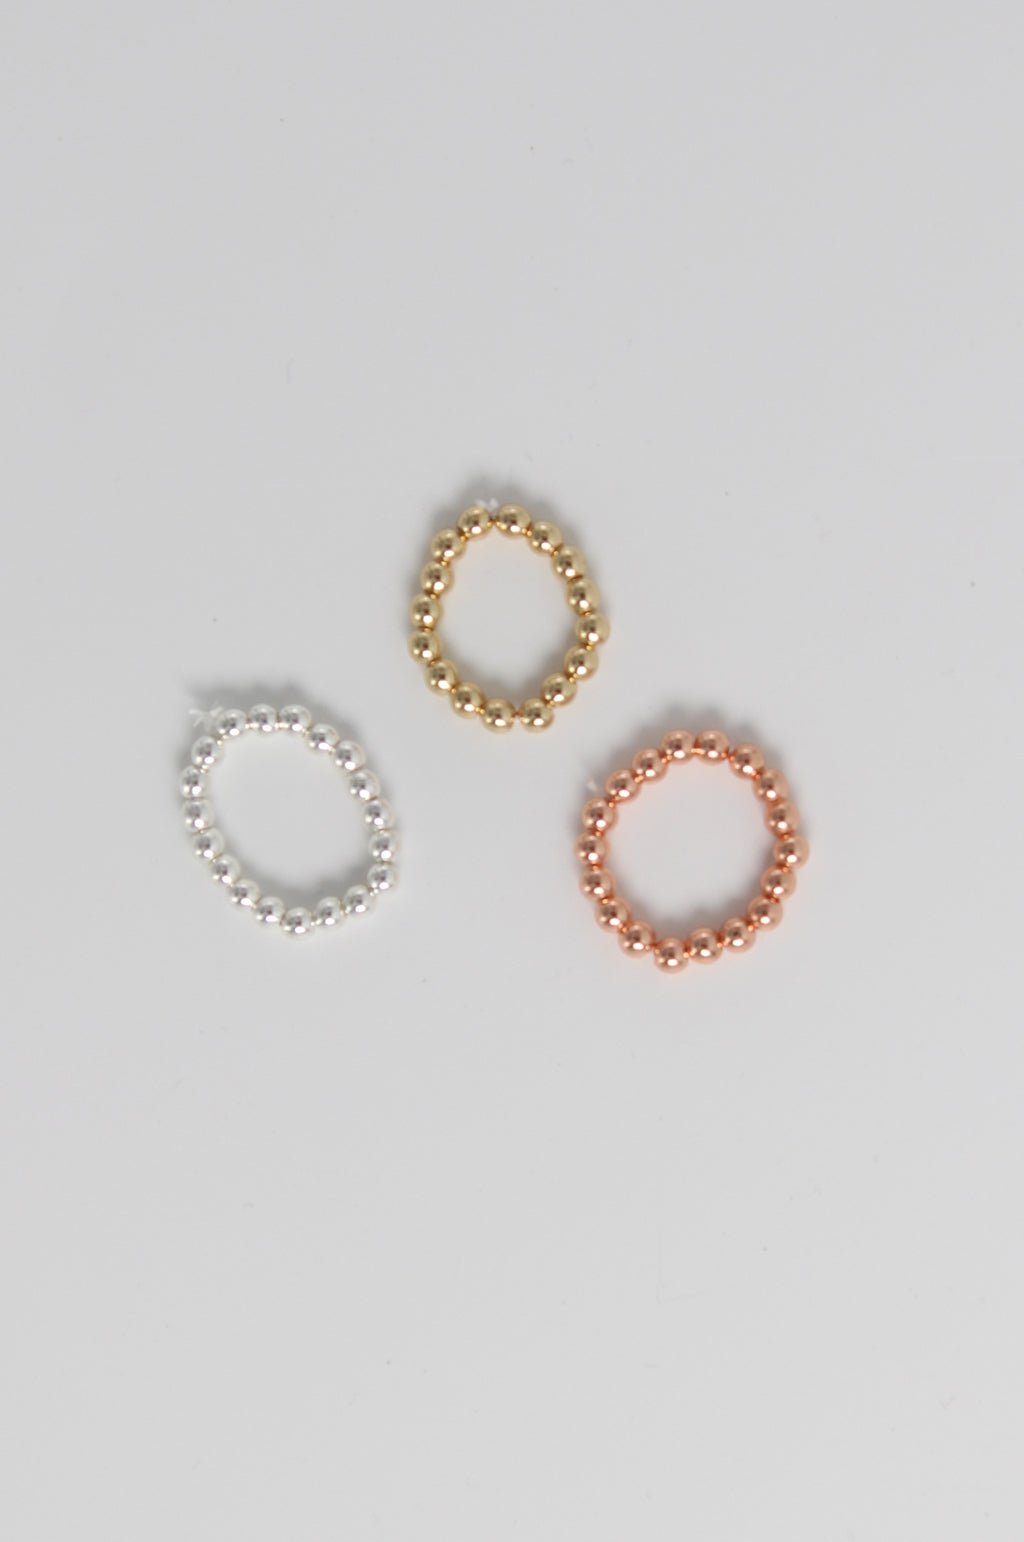 Stackable Stretch Rings by Annie Claire Designs - SoSis